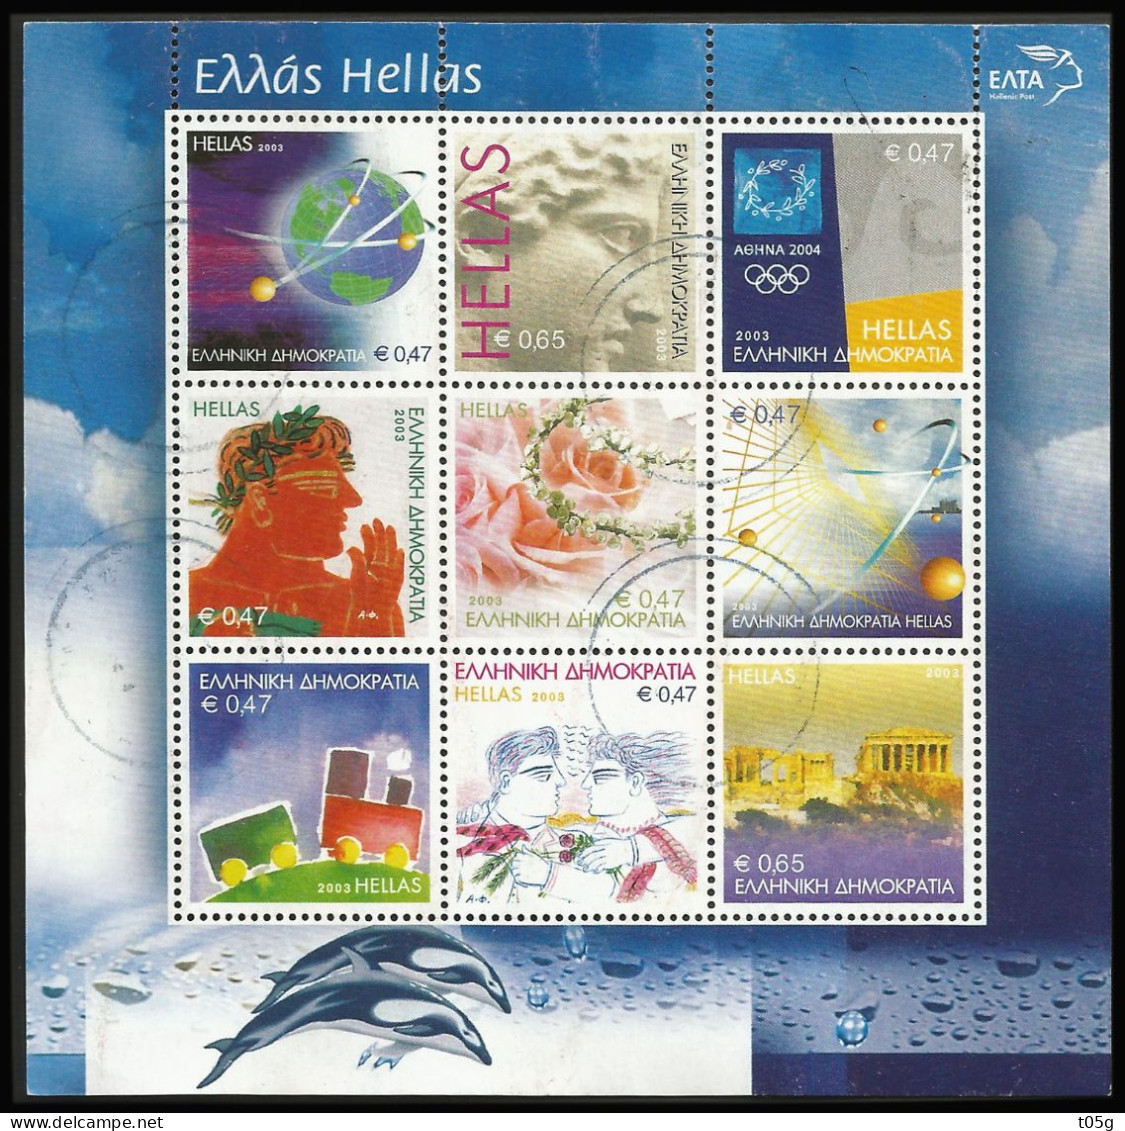 GREECE- GRECE - HELLAS 2003: Special Set Personal Stamps Sheetlet used - Used Stamps